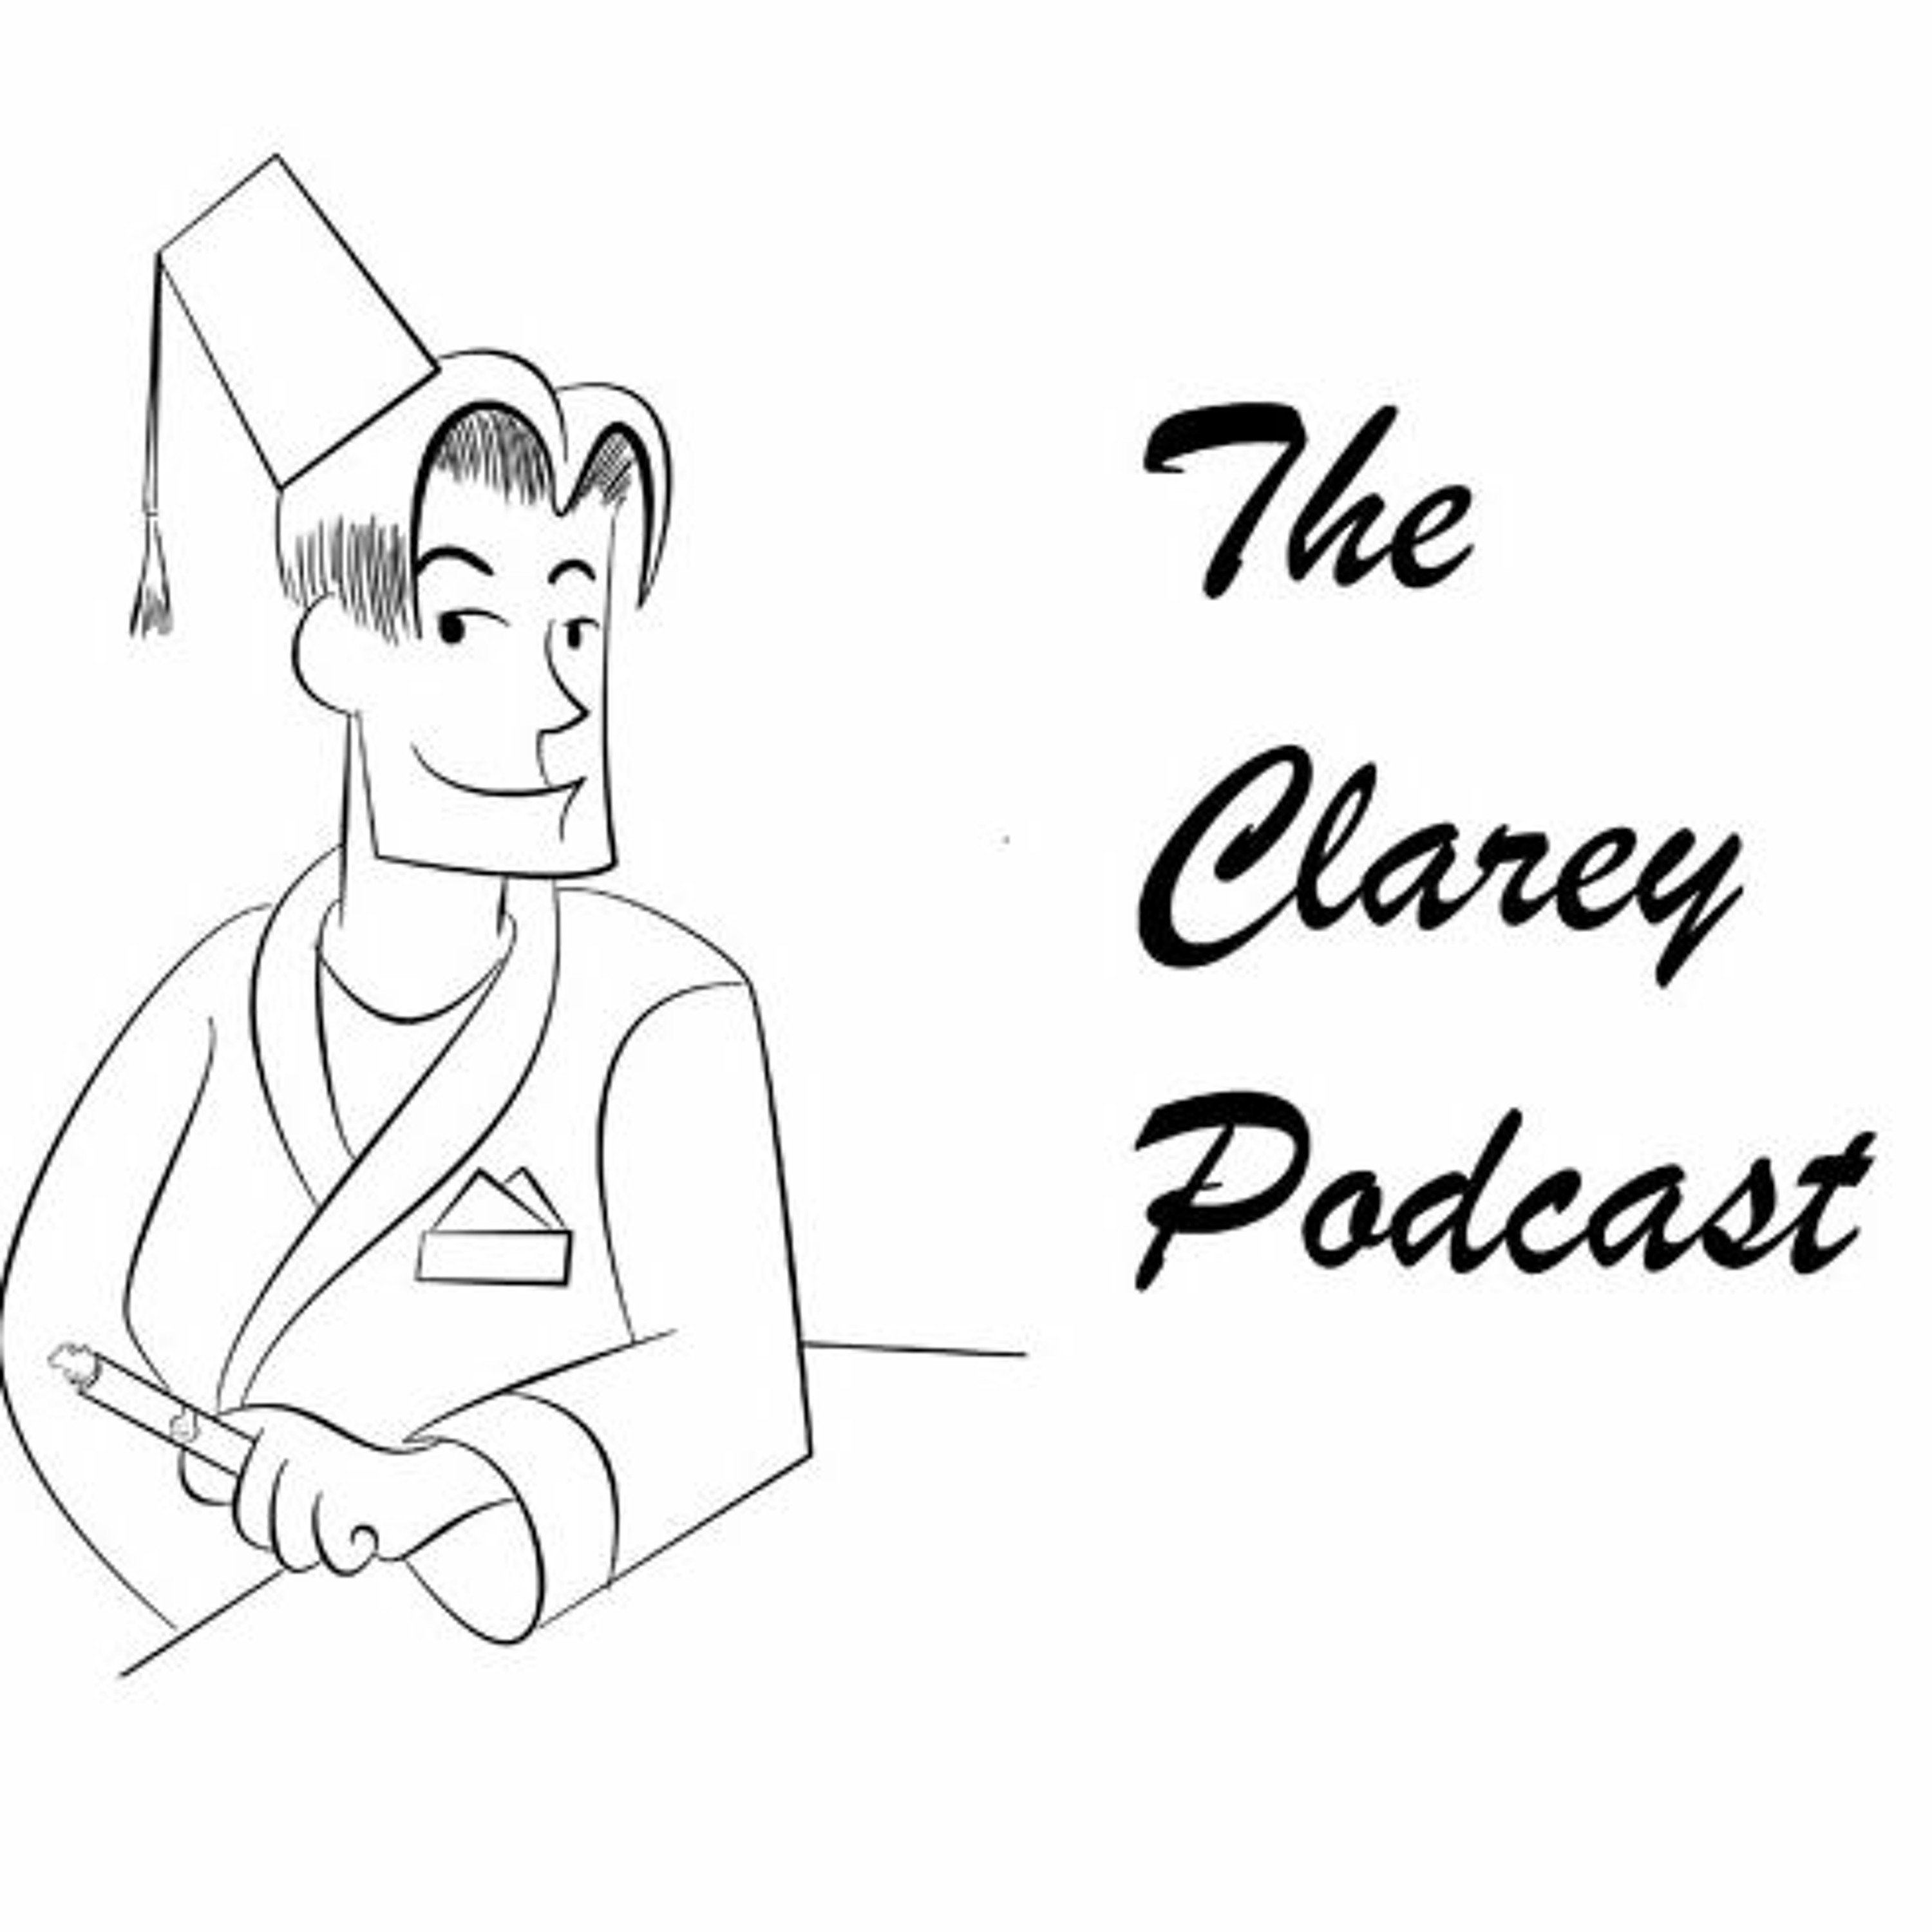 The Clarey Podcast - The 